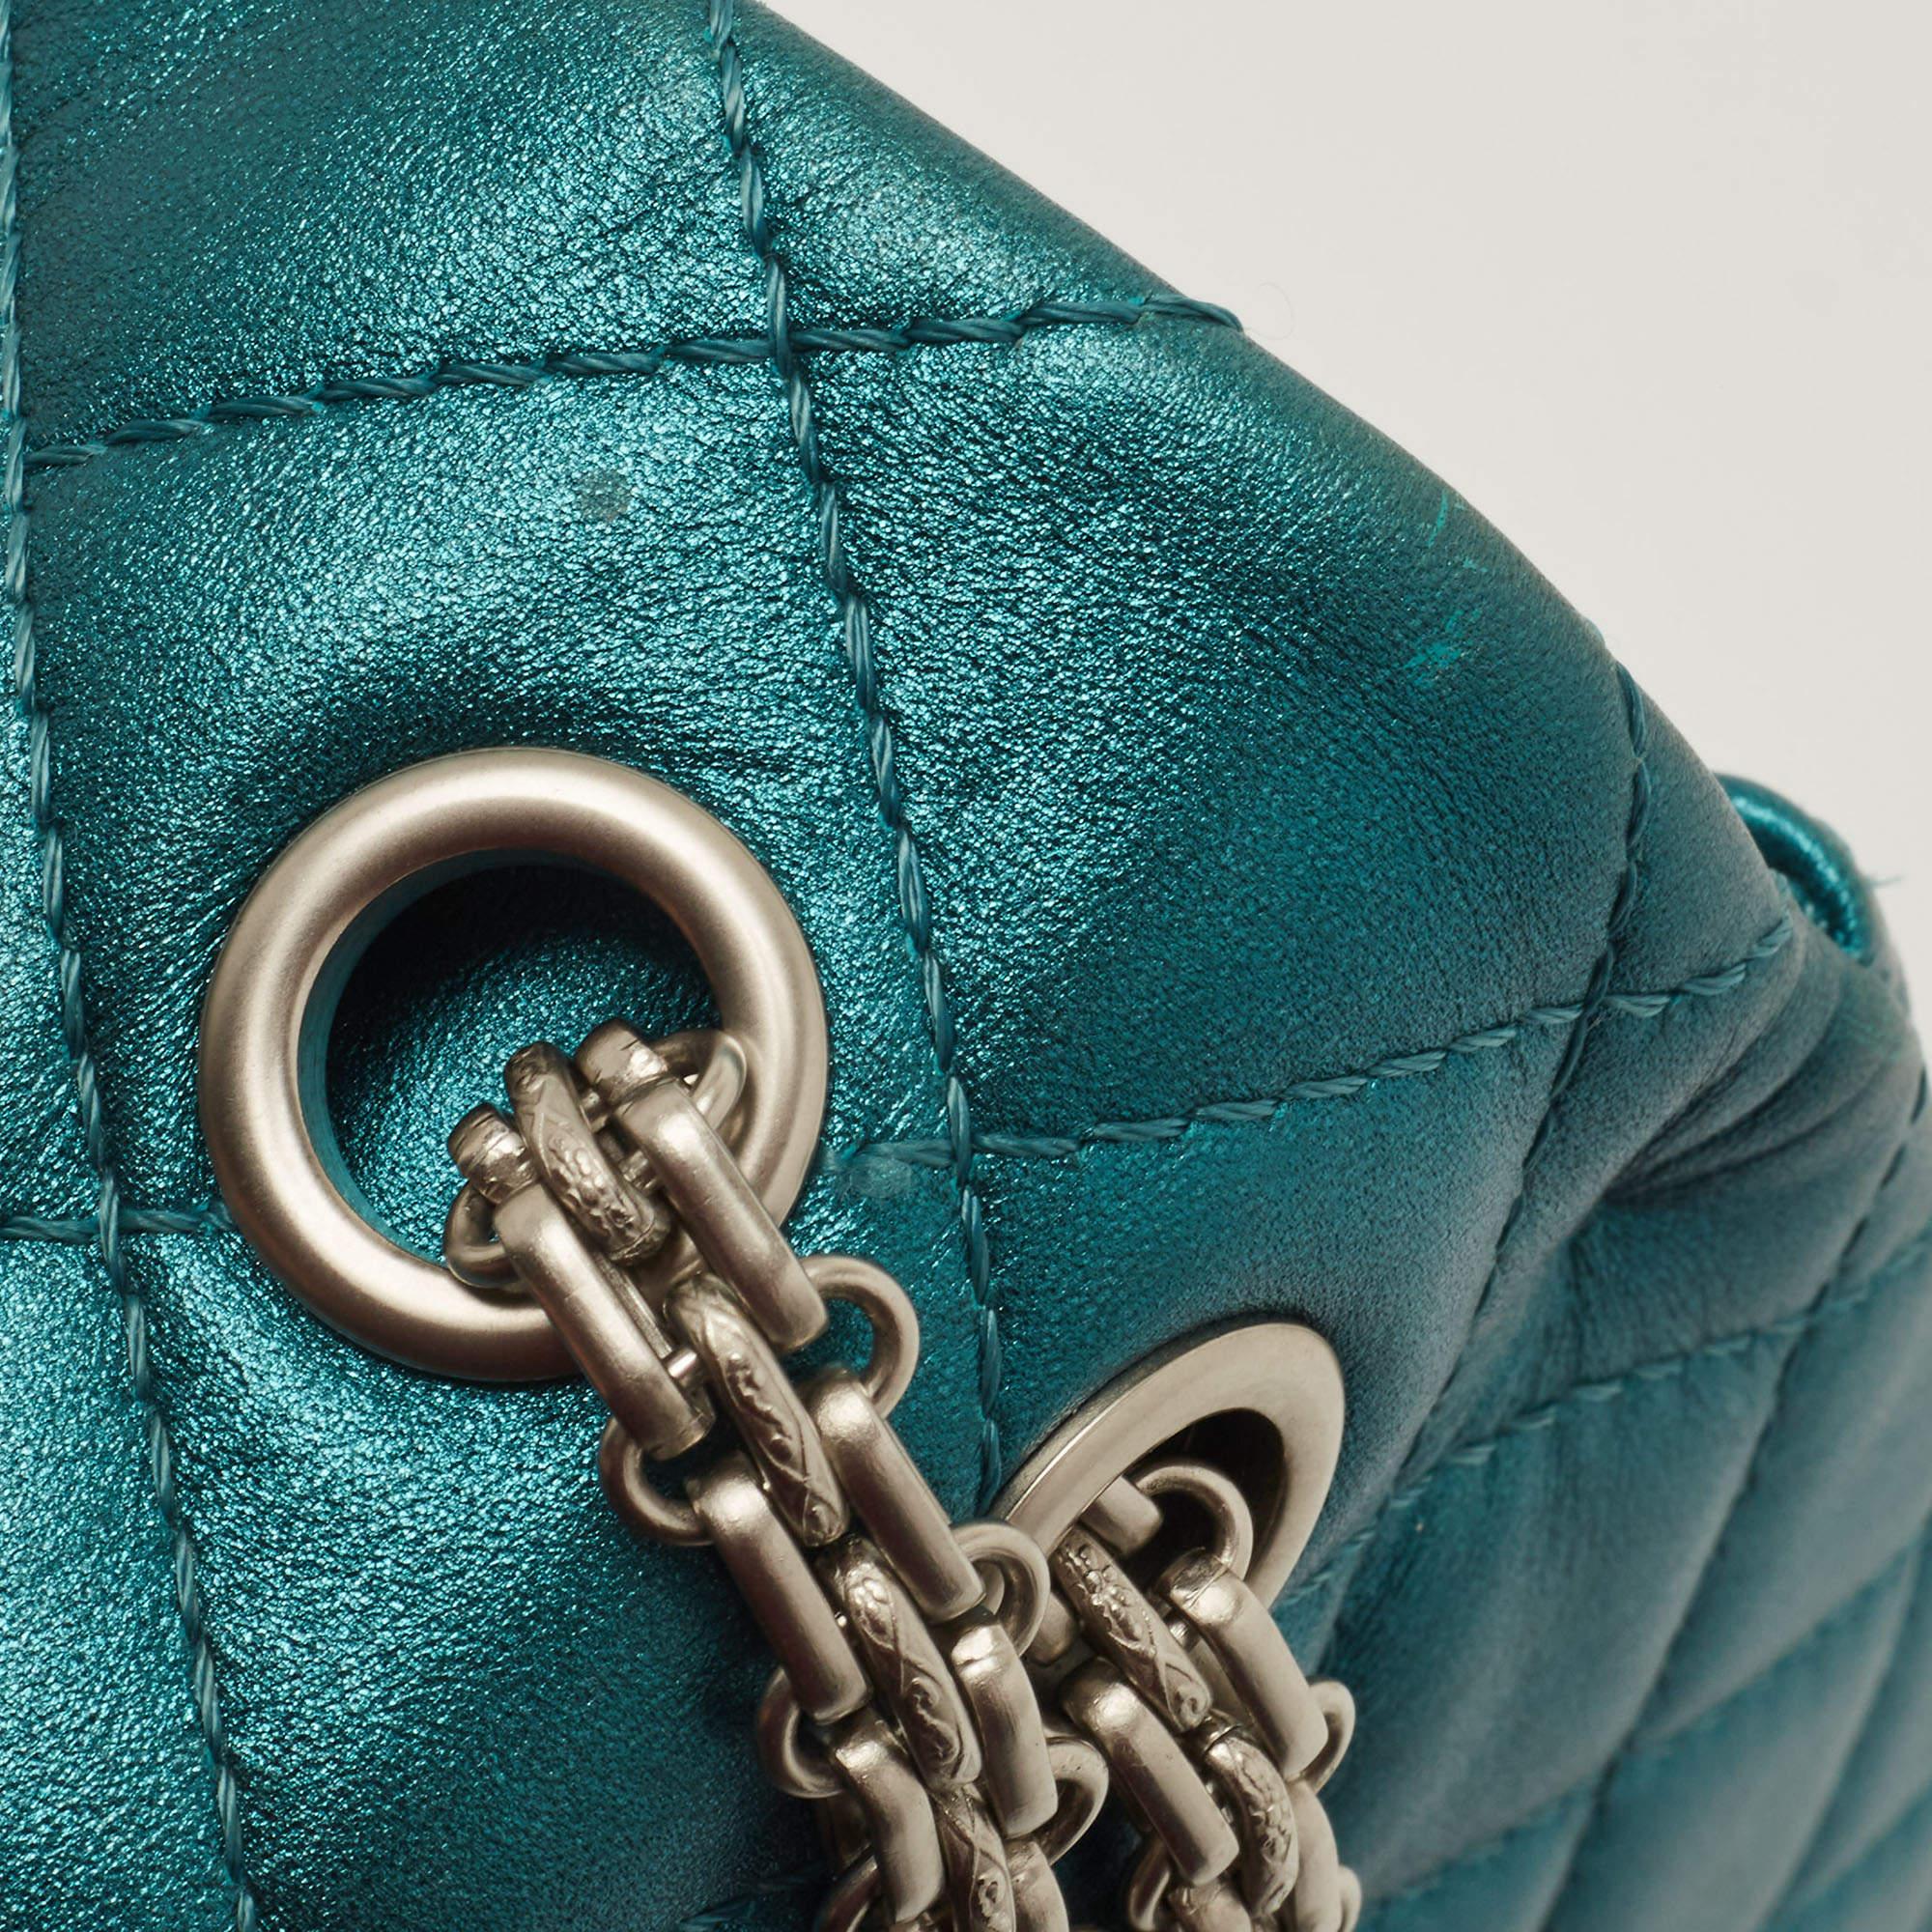 Chanel Metallic Teal Green Quilted Leather Reissue 2.55 Classic 226 Flap Bag en vente 4